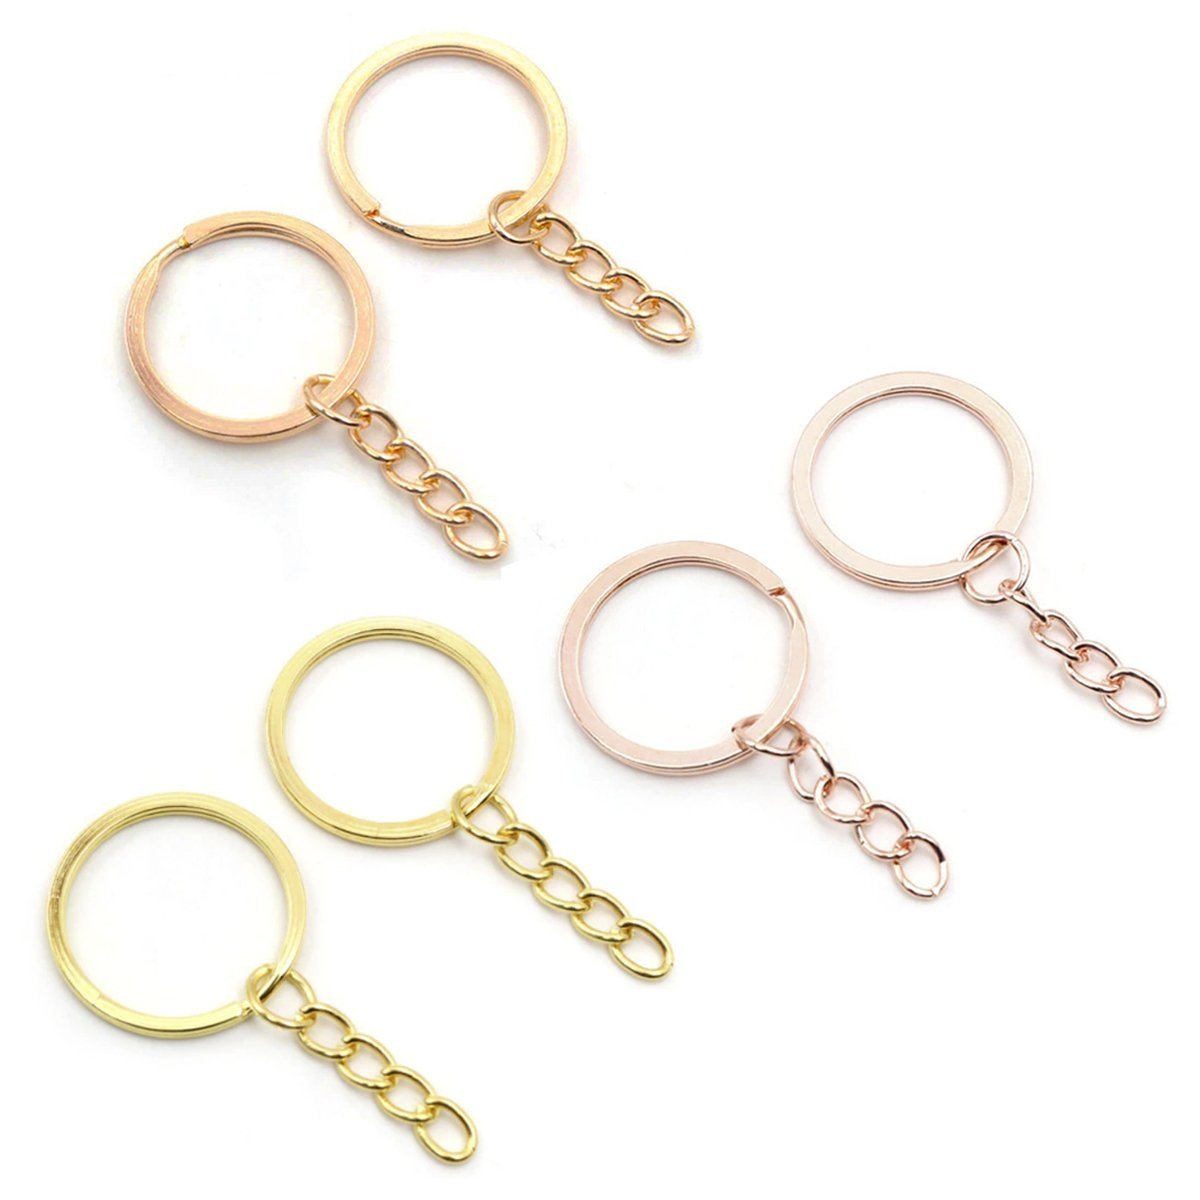 20pcs 30mm Rose Gold Ancient Keyring Keychain Split Ring Chain Key Rings Key Chains - Gold - - Asia Sell